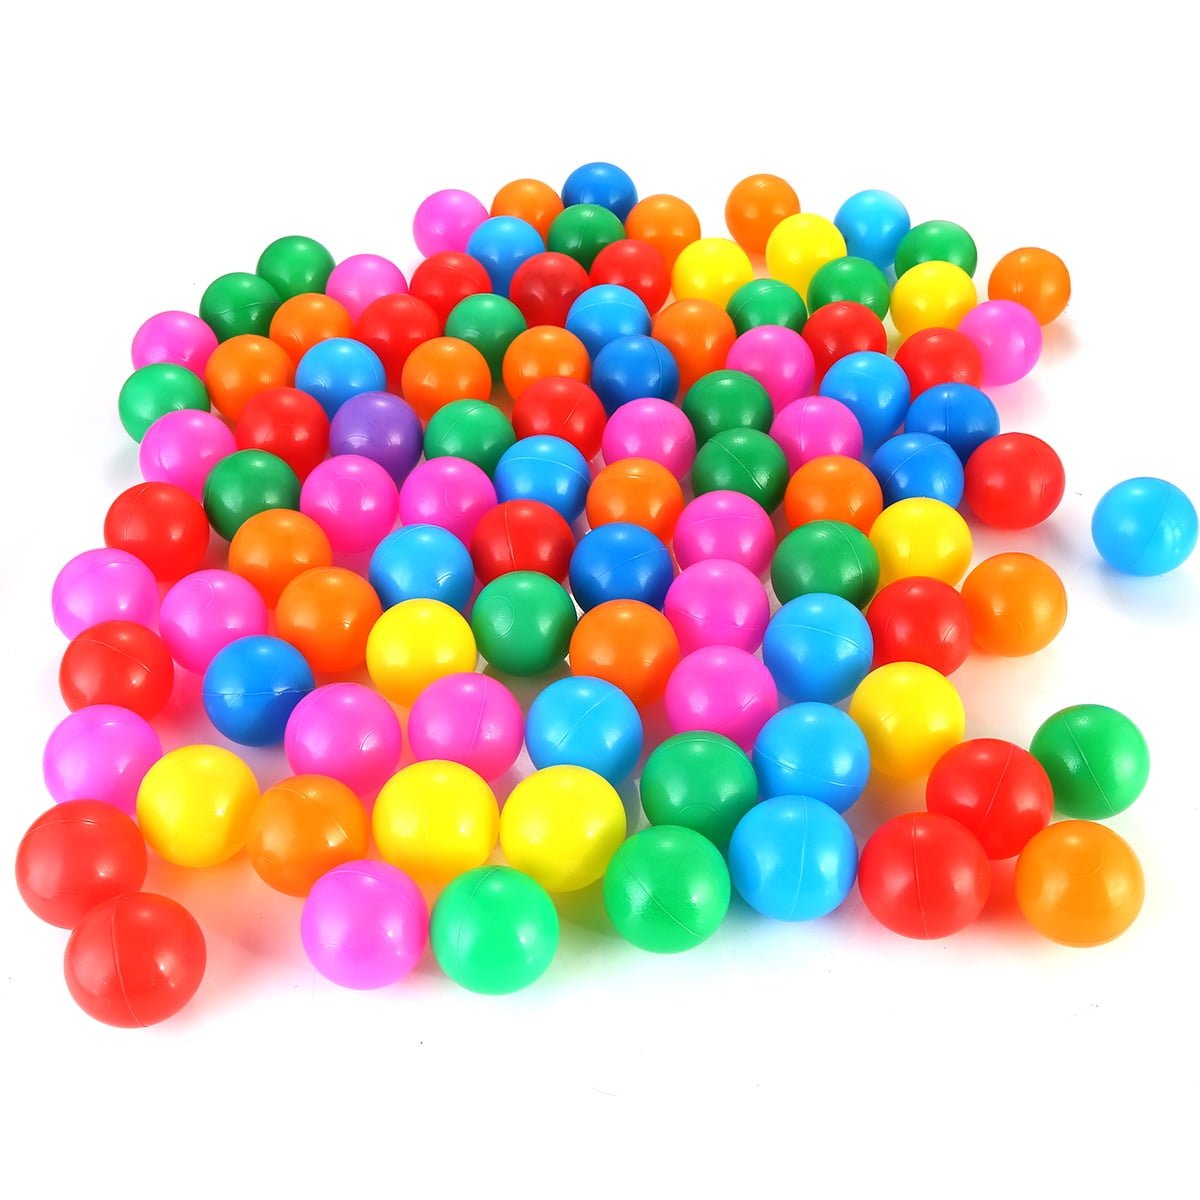 1PC 8CM Plastic Pit Balls For Children Ball Pits Kids Toys Coloured Play Pool 